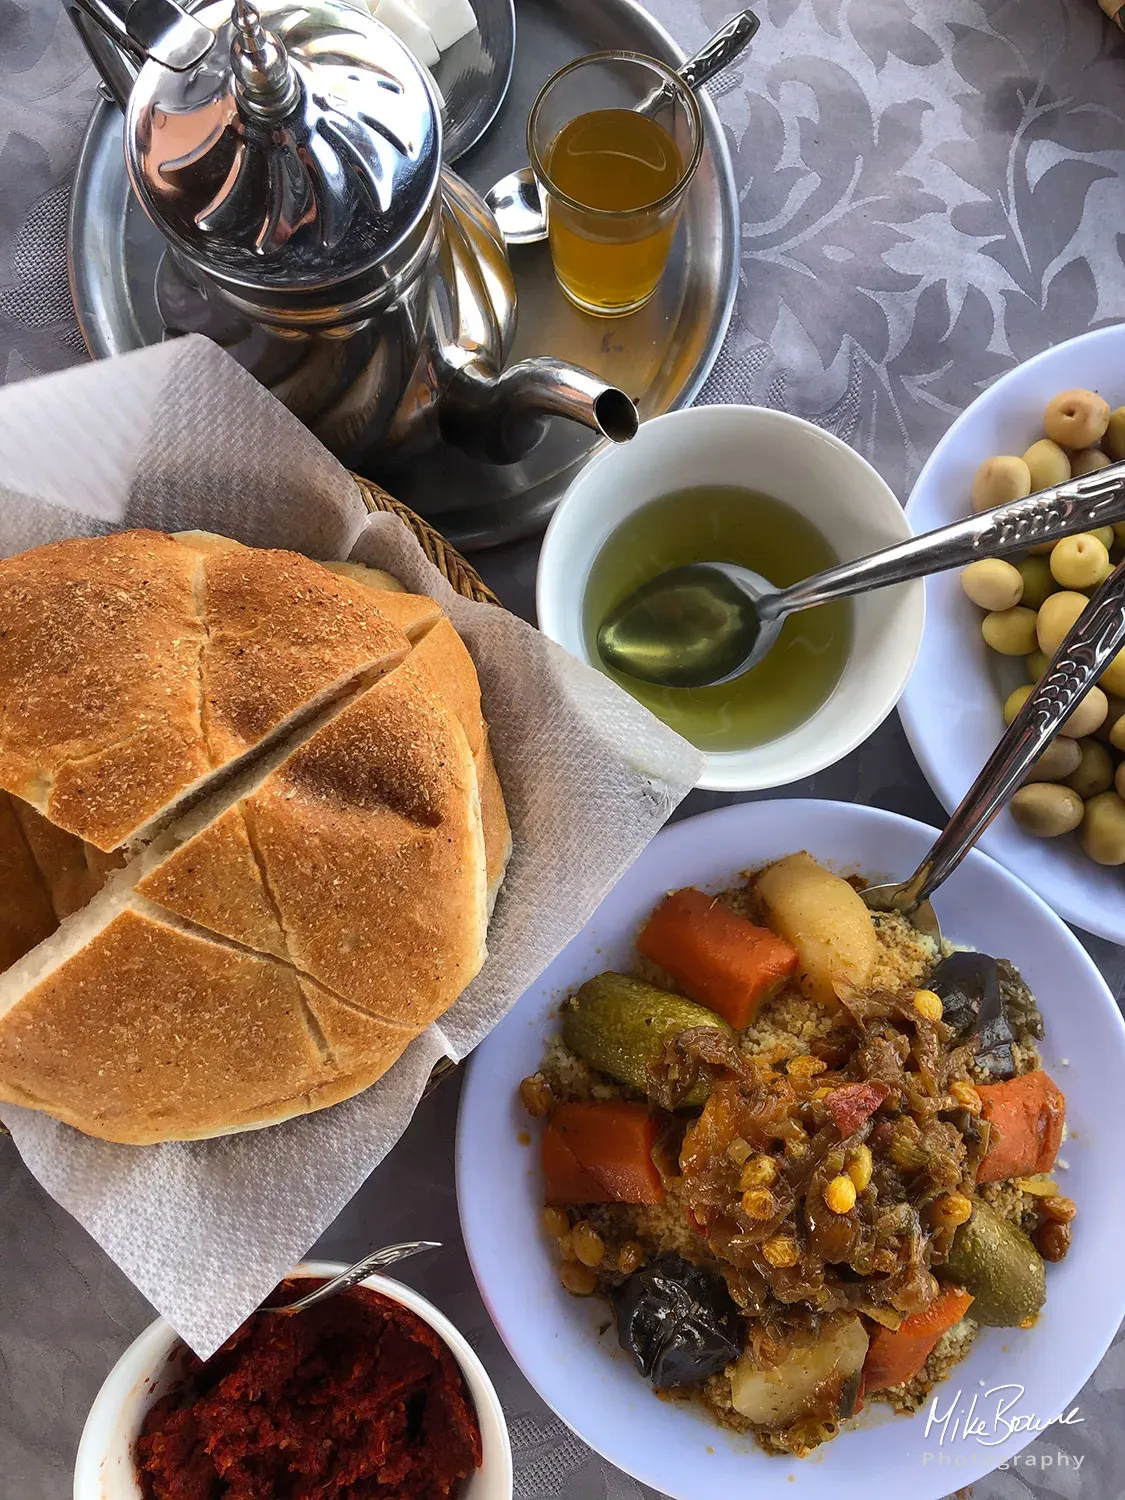 Traditional Moroccan food of unleavened bread, olive oil, mixed vegetables, green olives and a silver pot of tea